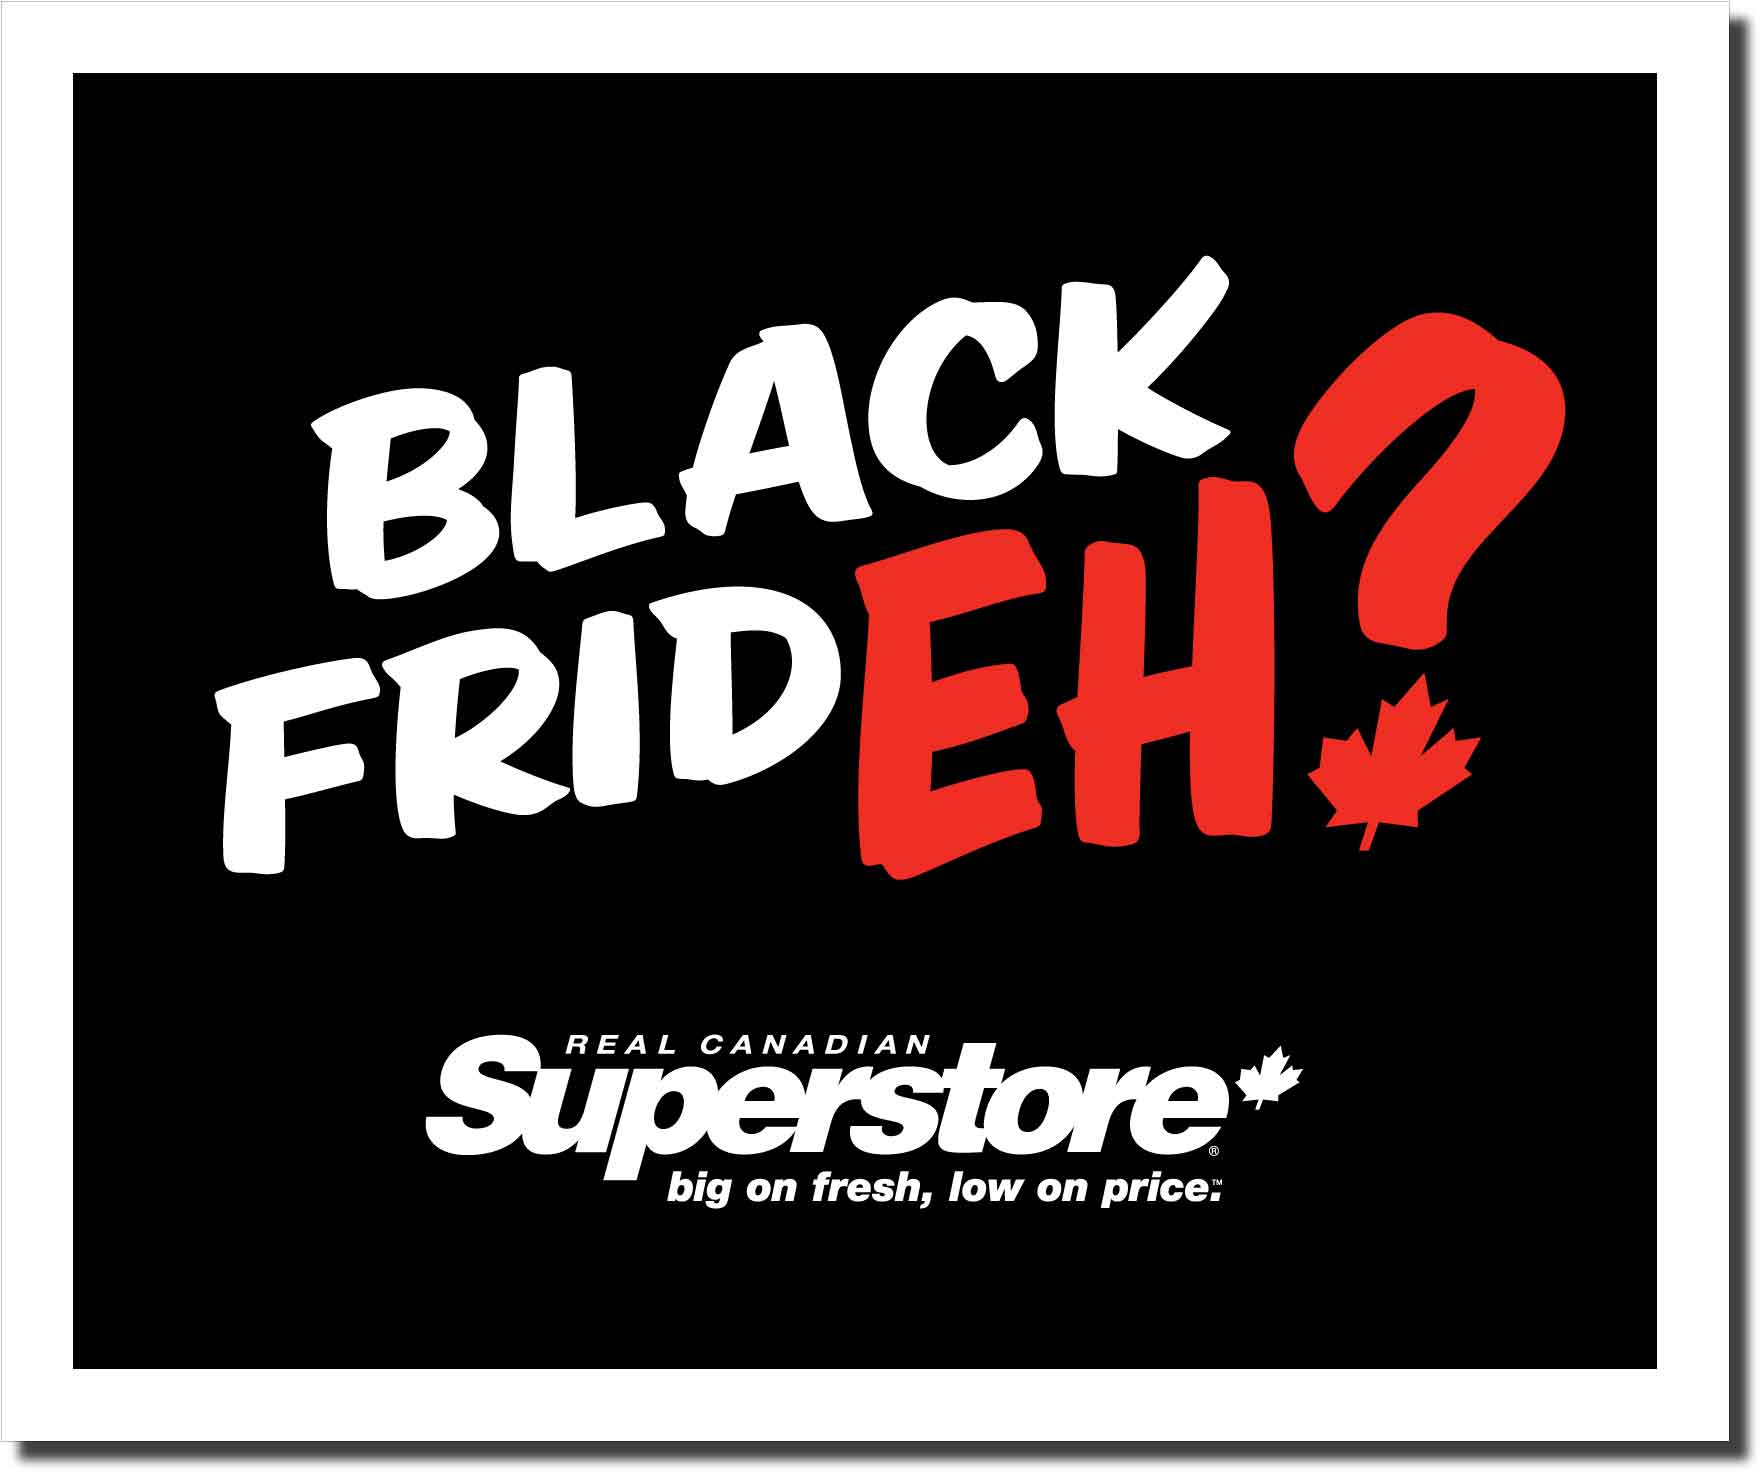 Q: Hi, How much do you charge for 100 of these Black Friday lawn signs for Real Canadian Superstore?